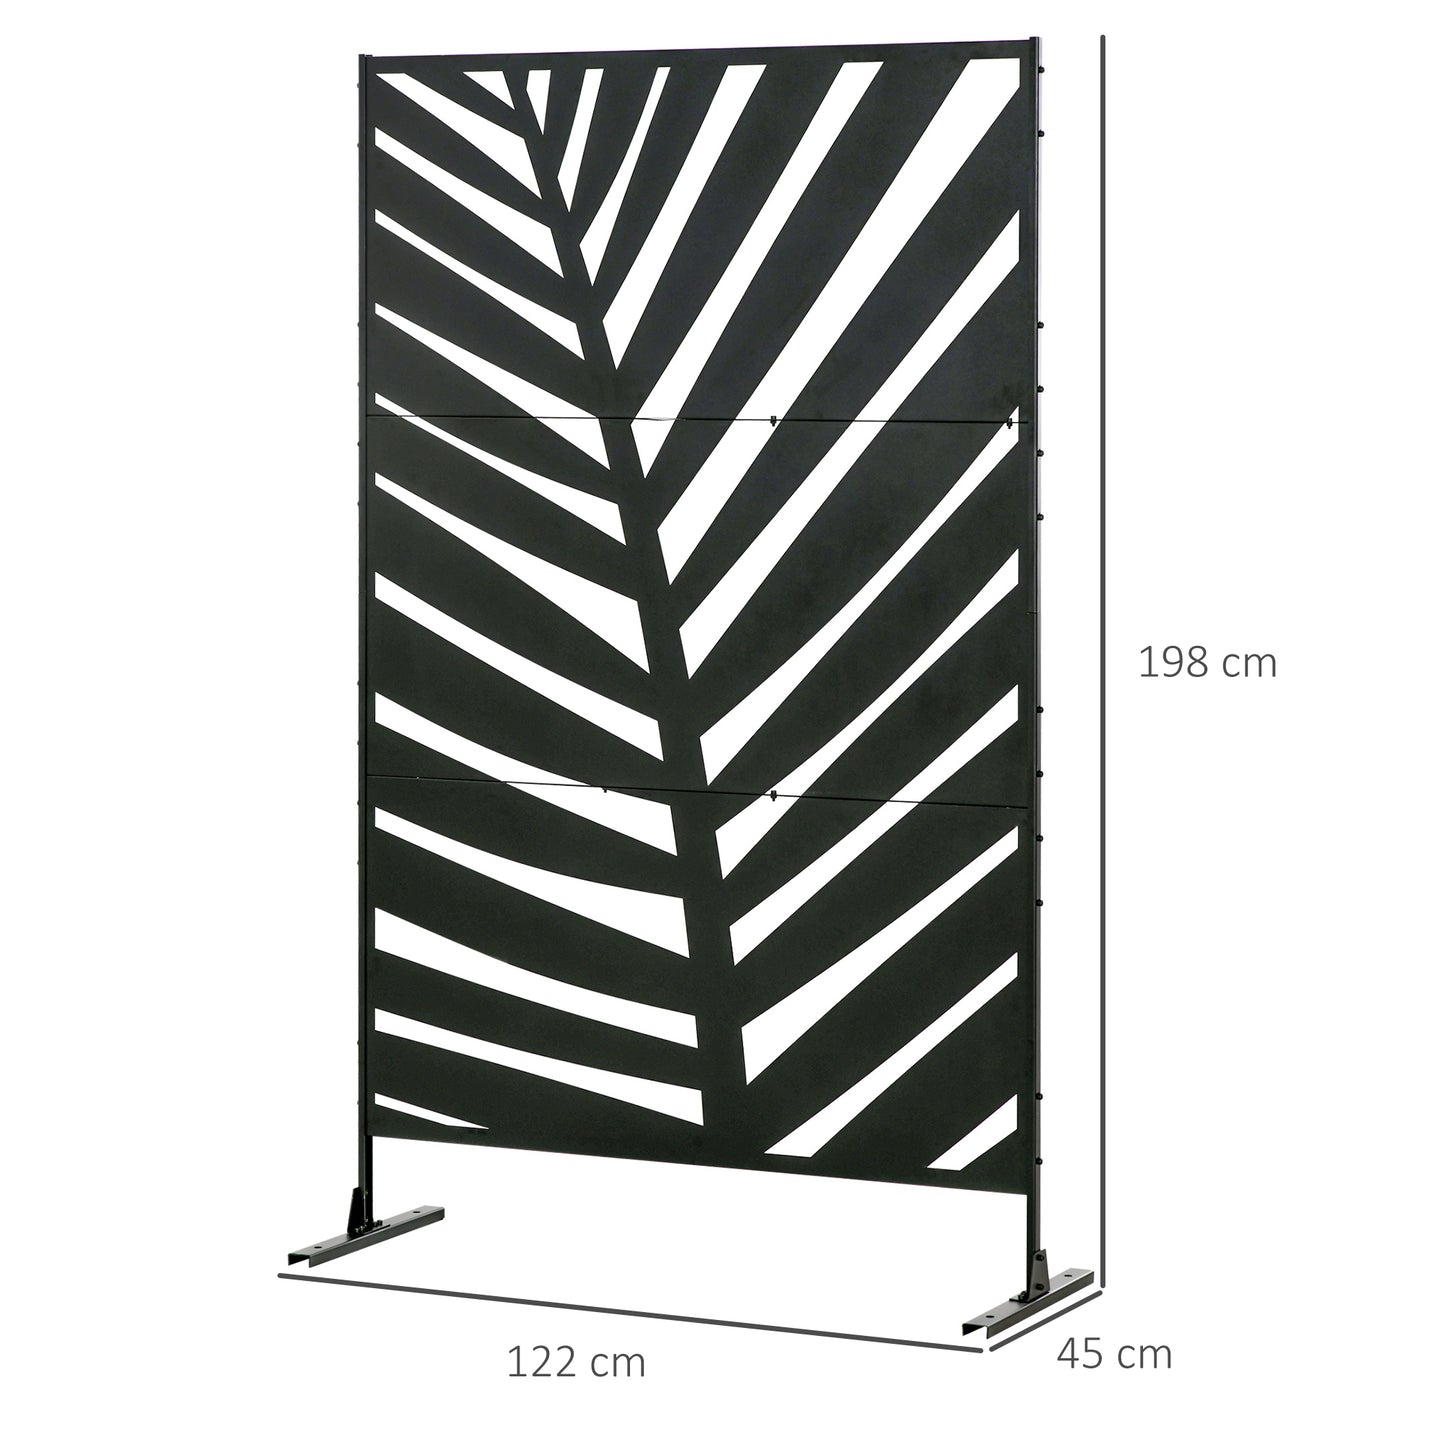 Outsunny Outdoor Privacy Screen with Stand and Ground Stakes, 6.5FT Metal Outdoor Divider, Decorative Privacy Panel for Garden Patio Pool Hot Tub, Banana Leaf Style